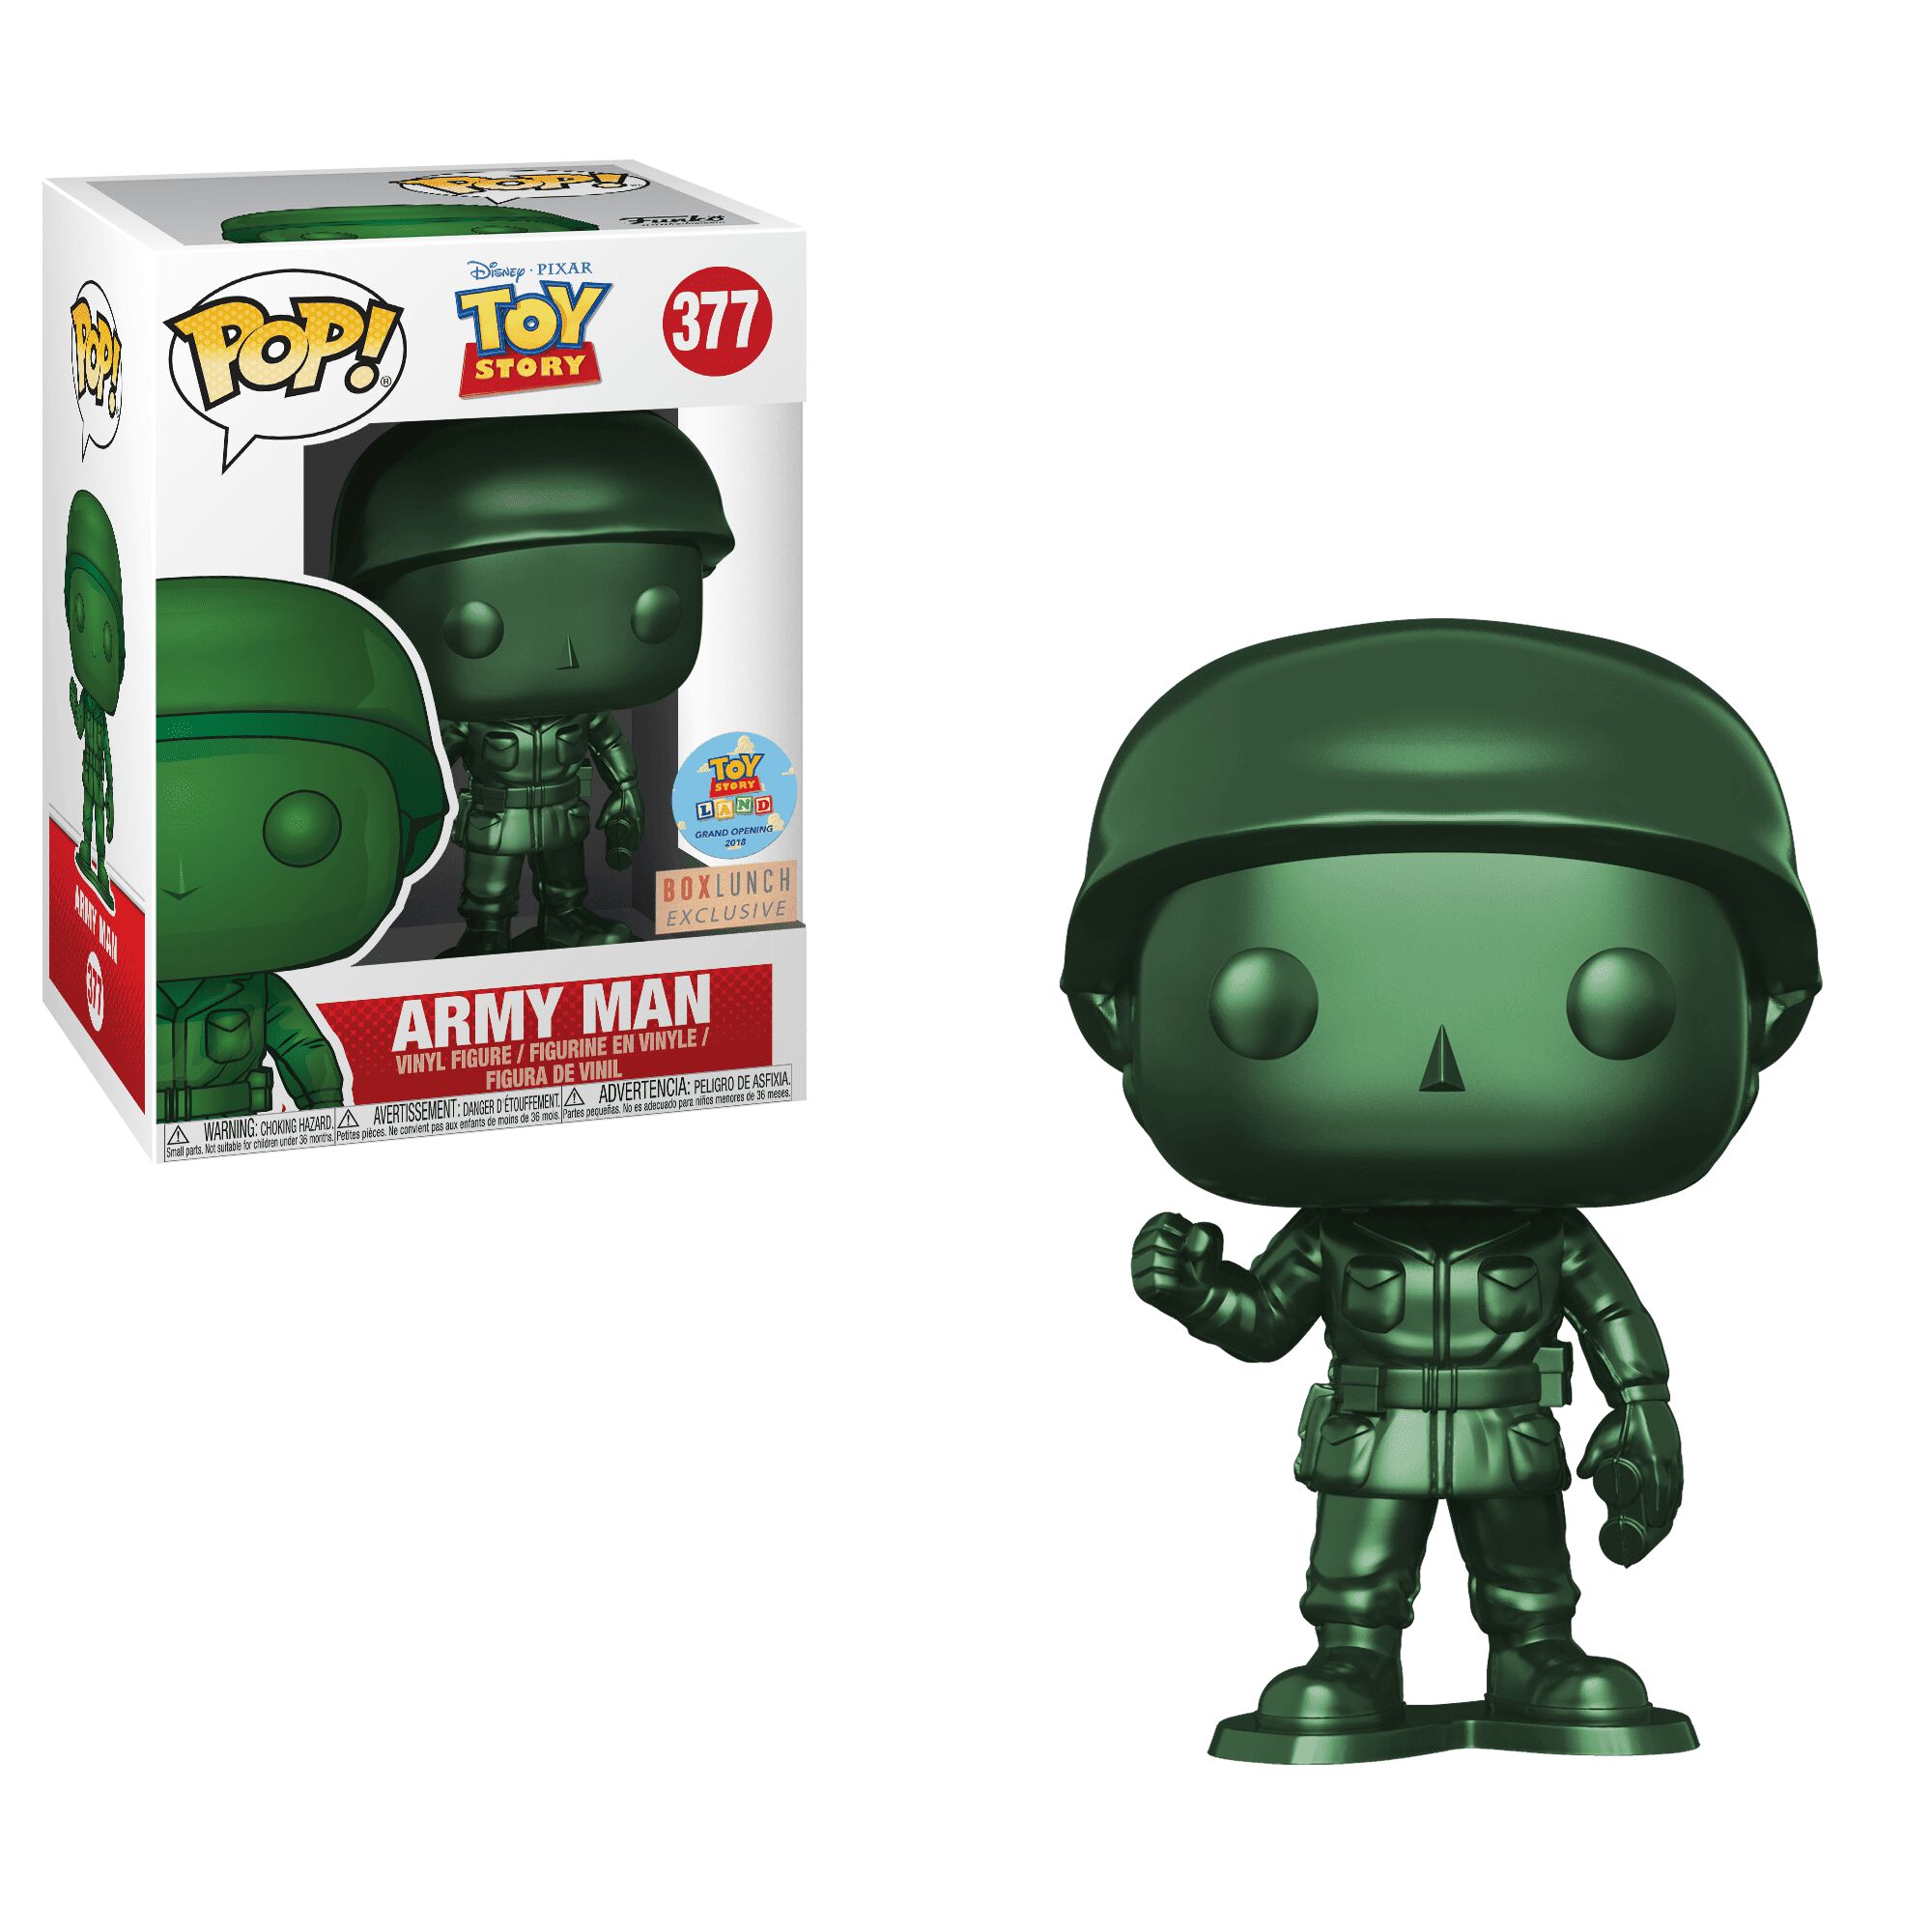 Coming Soon: BoxLunch Exclusive Metallic Army Man Pop!